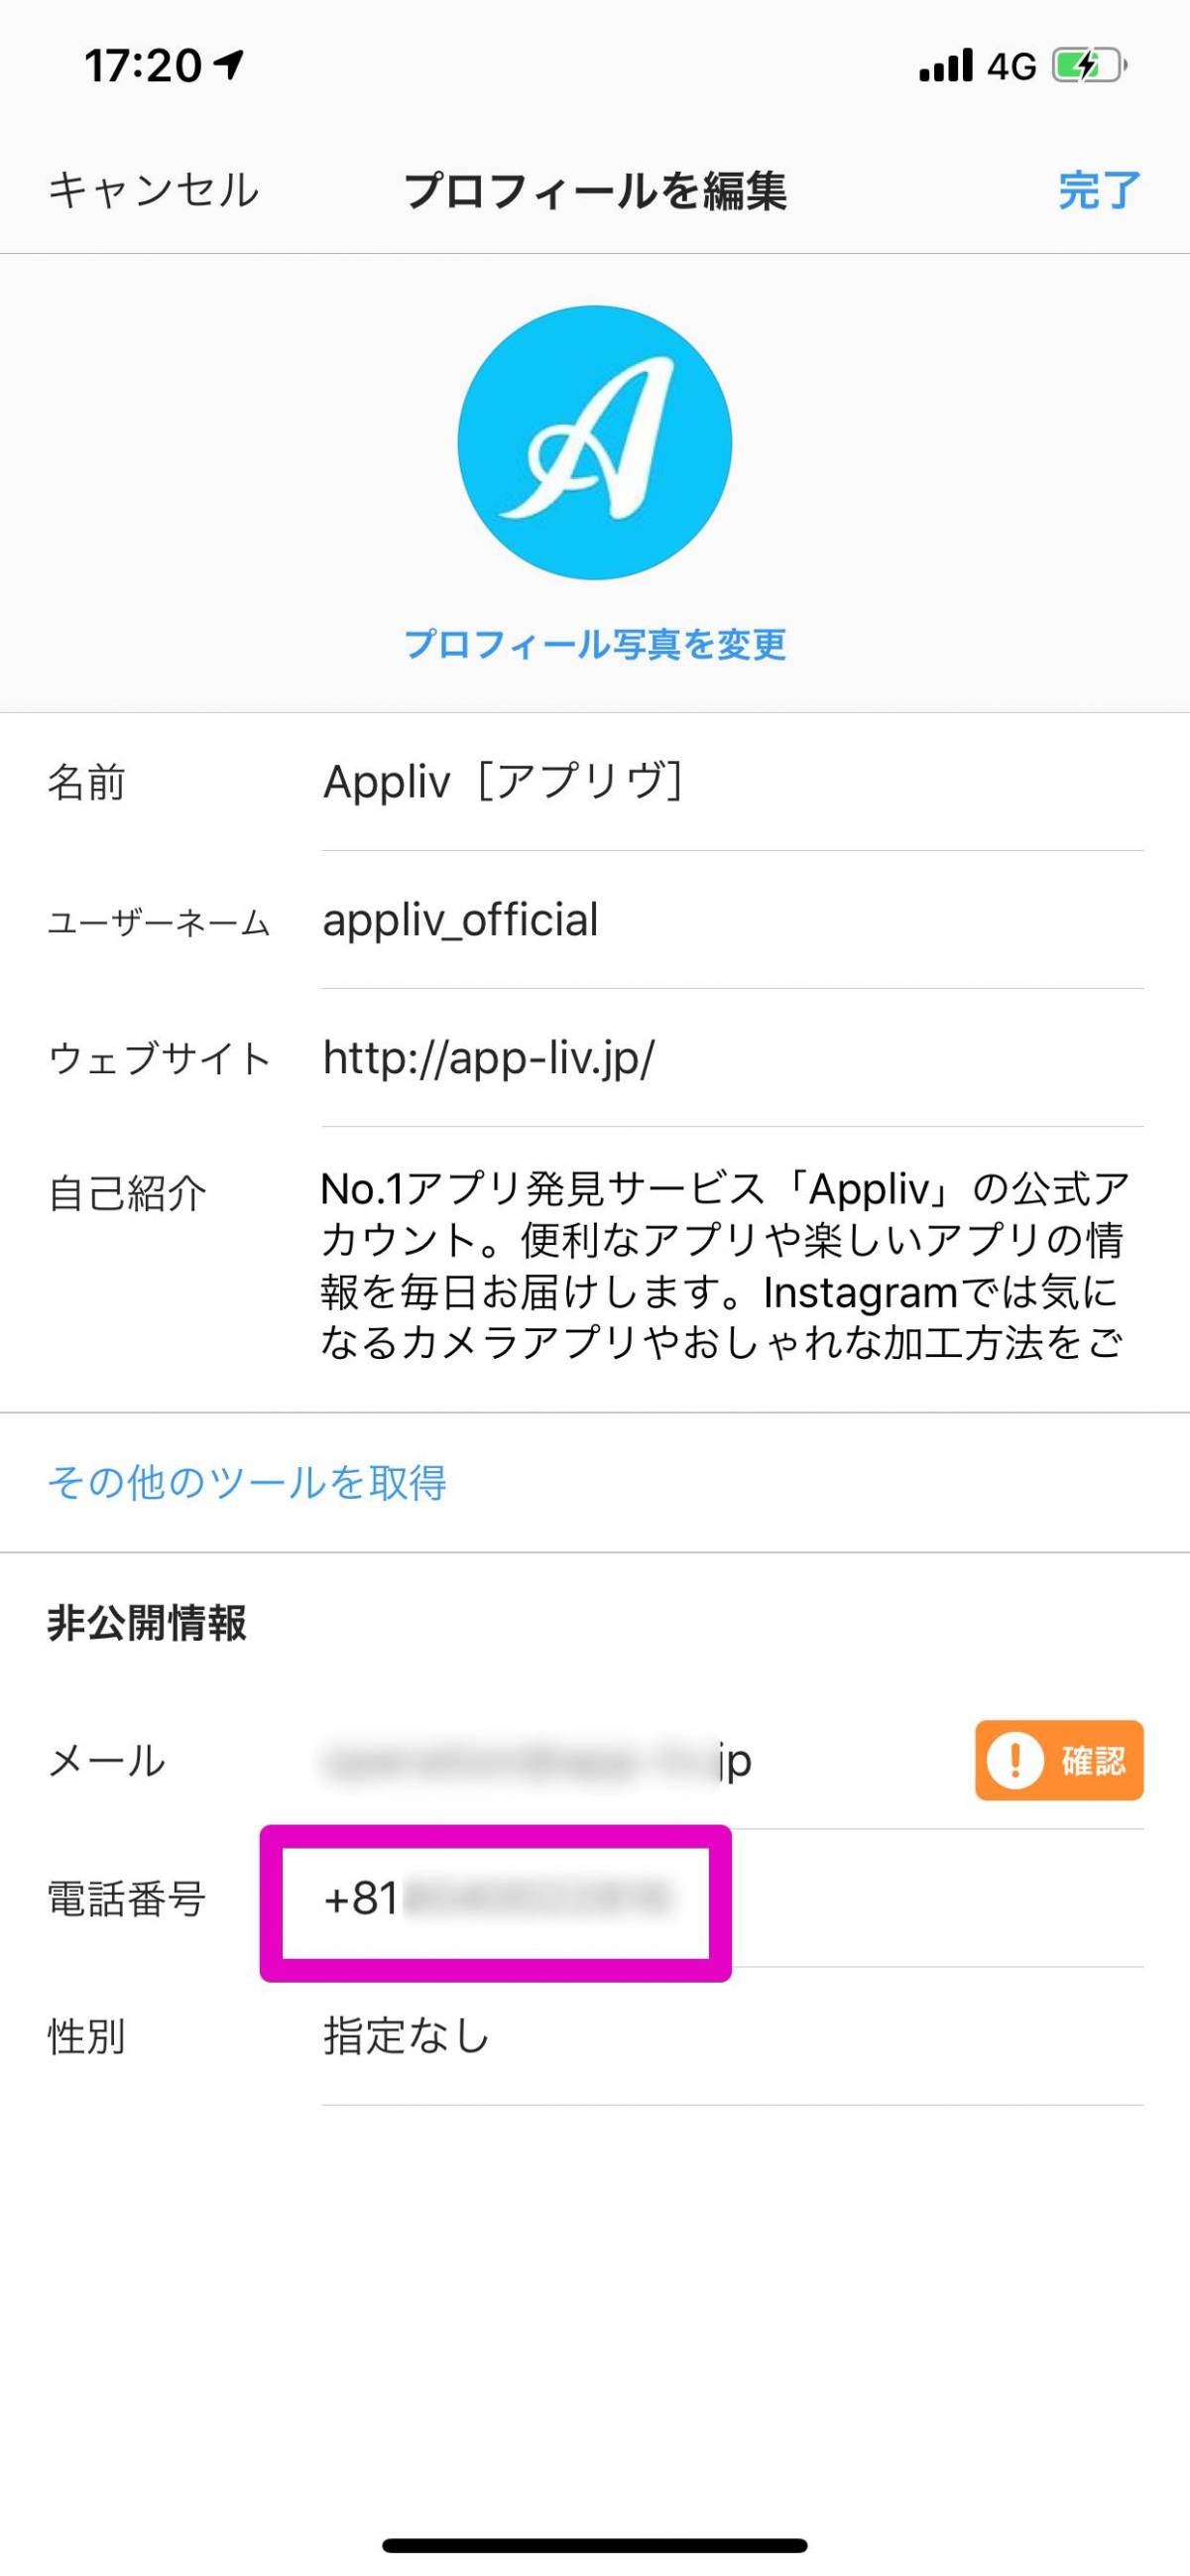 Instagram 登録メールアドレス 電話番号の確認 変更方法 Iphone Android の画像 4枚目 Appliv Topics